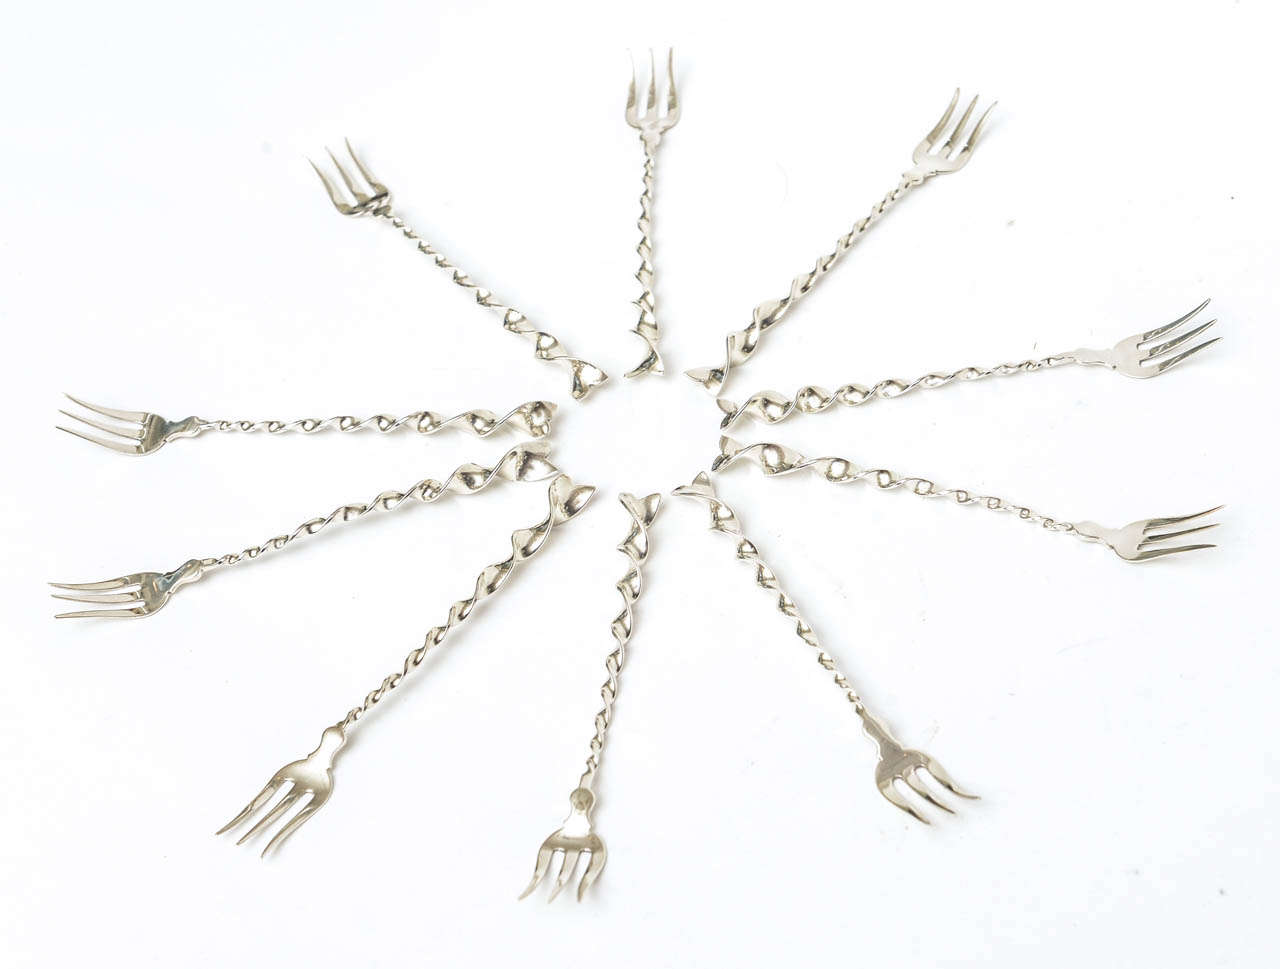 These wonderful vintage hallmarked sterling cocktail or serving forks add beauty to any table. They have a twist and ball with a gold wash. Elegant and timeless! They are by the company Whiting. These are from the 1900s but work great in a modern